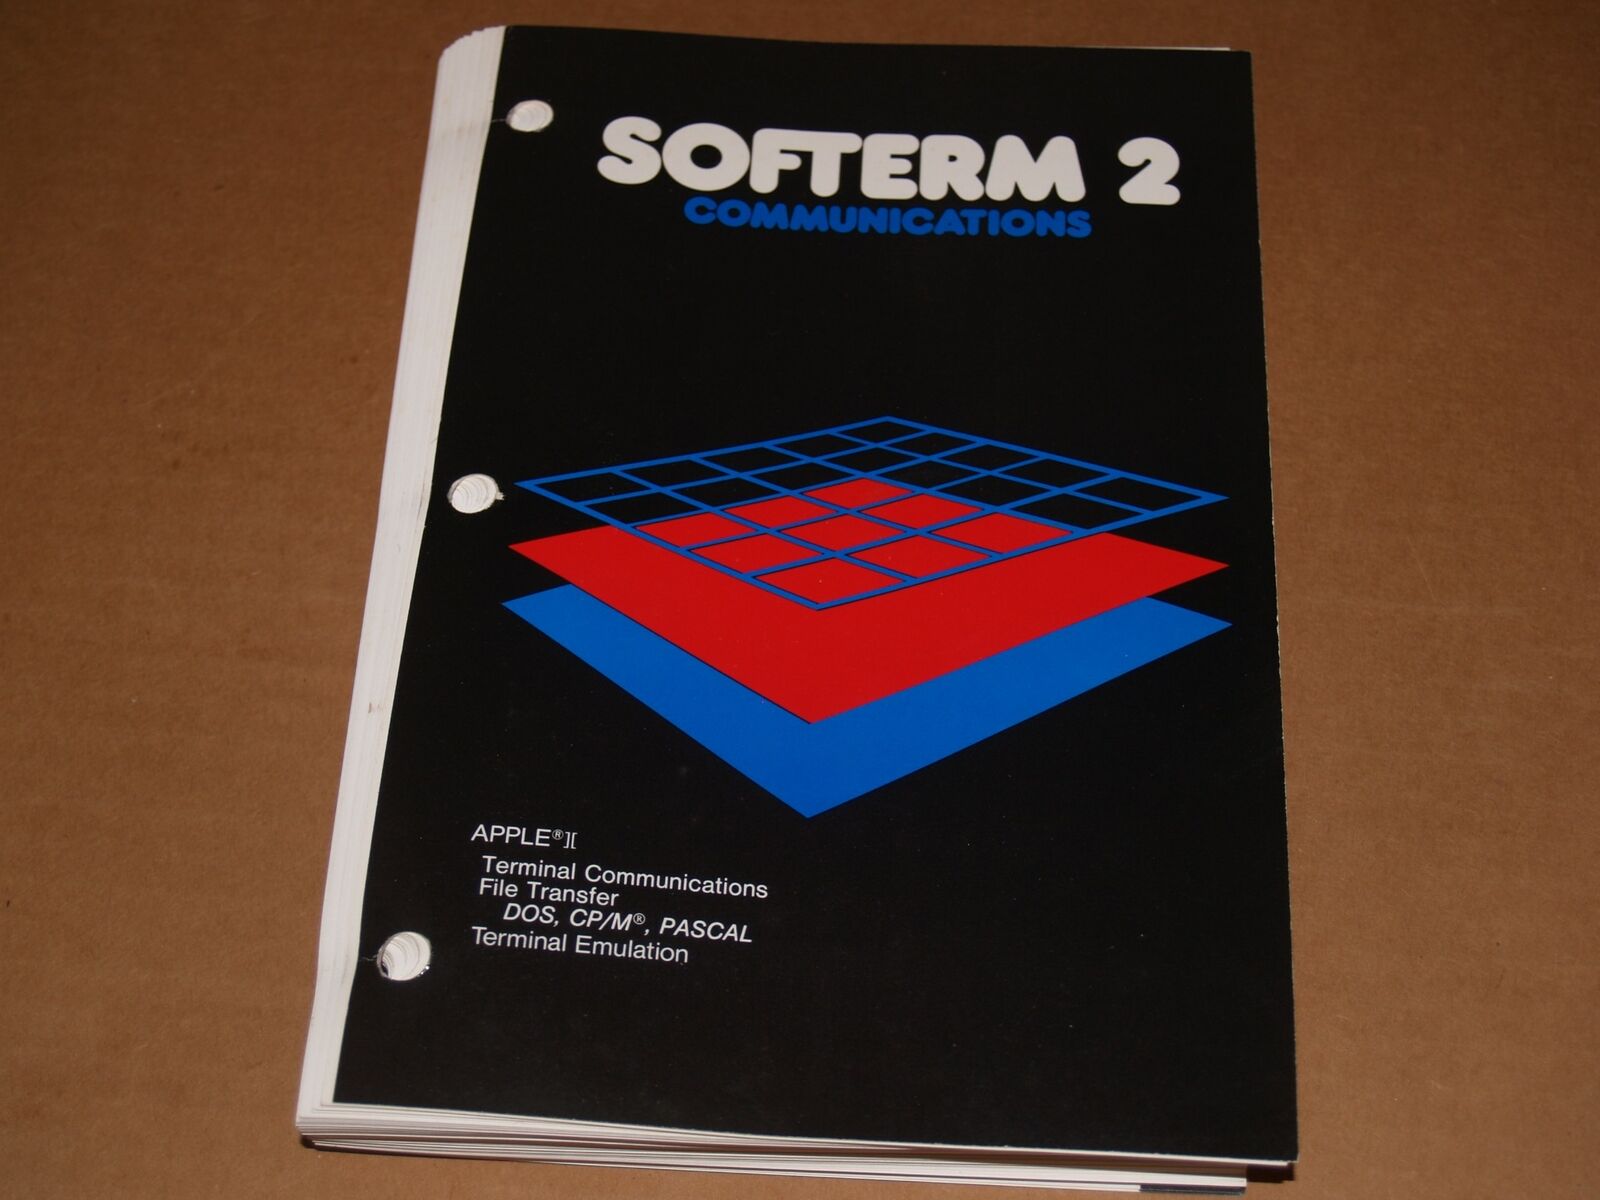 Vintage 1984 Manual for Softerm 2 Communications User Guide for Apple II